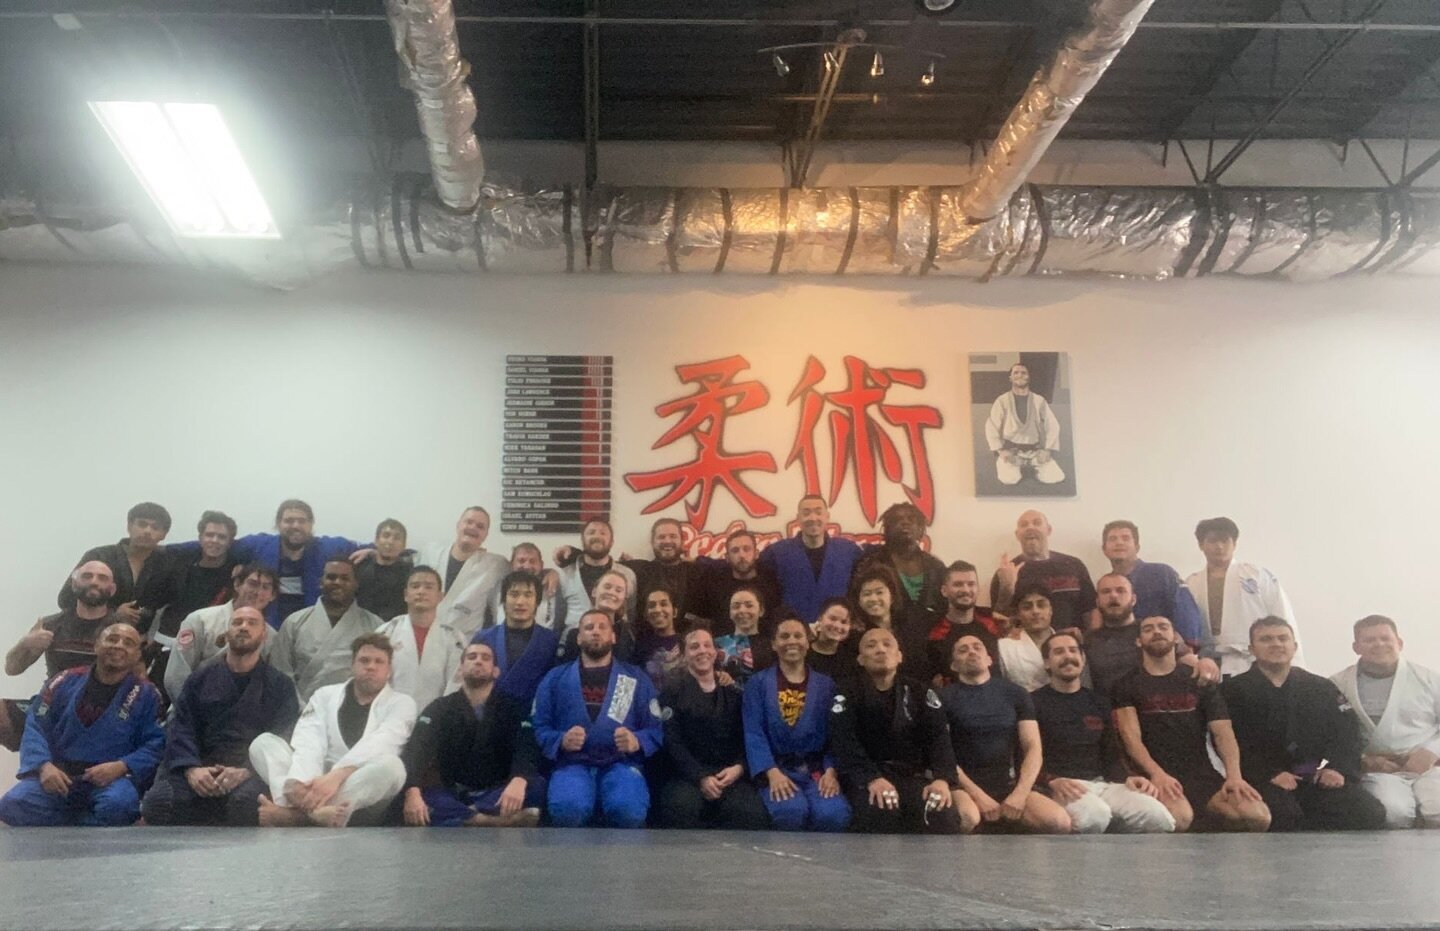 Packed house today! What an awesome day! So many great rolls with great people! Always happy to have visitors. Join us for Open Mat on Saturdays at 11:00am! All are welcome. Gi and No Gi! 💥 

#viannabrothers #chicagobjj #dviannabjj #pedroviannabjj #